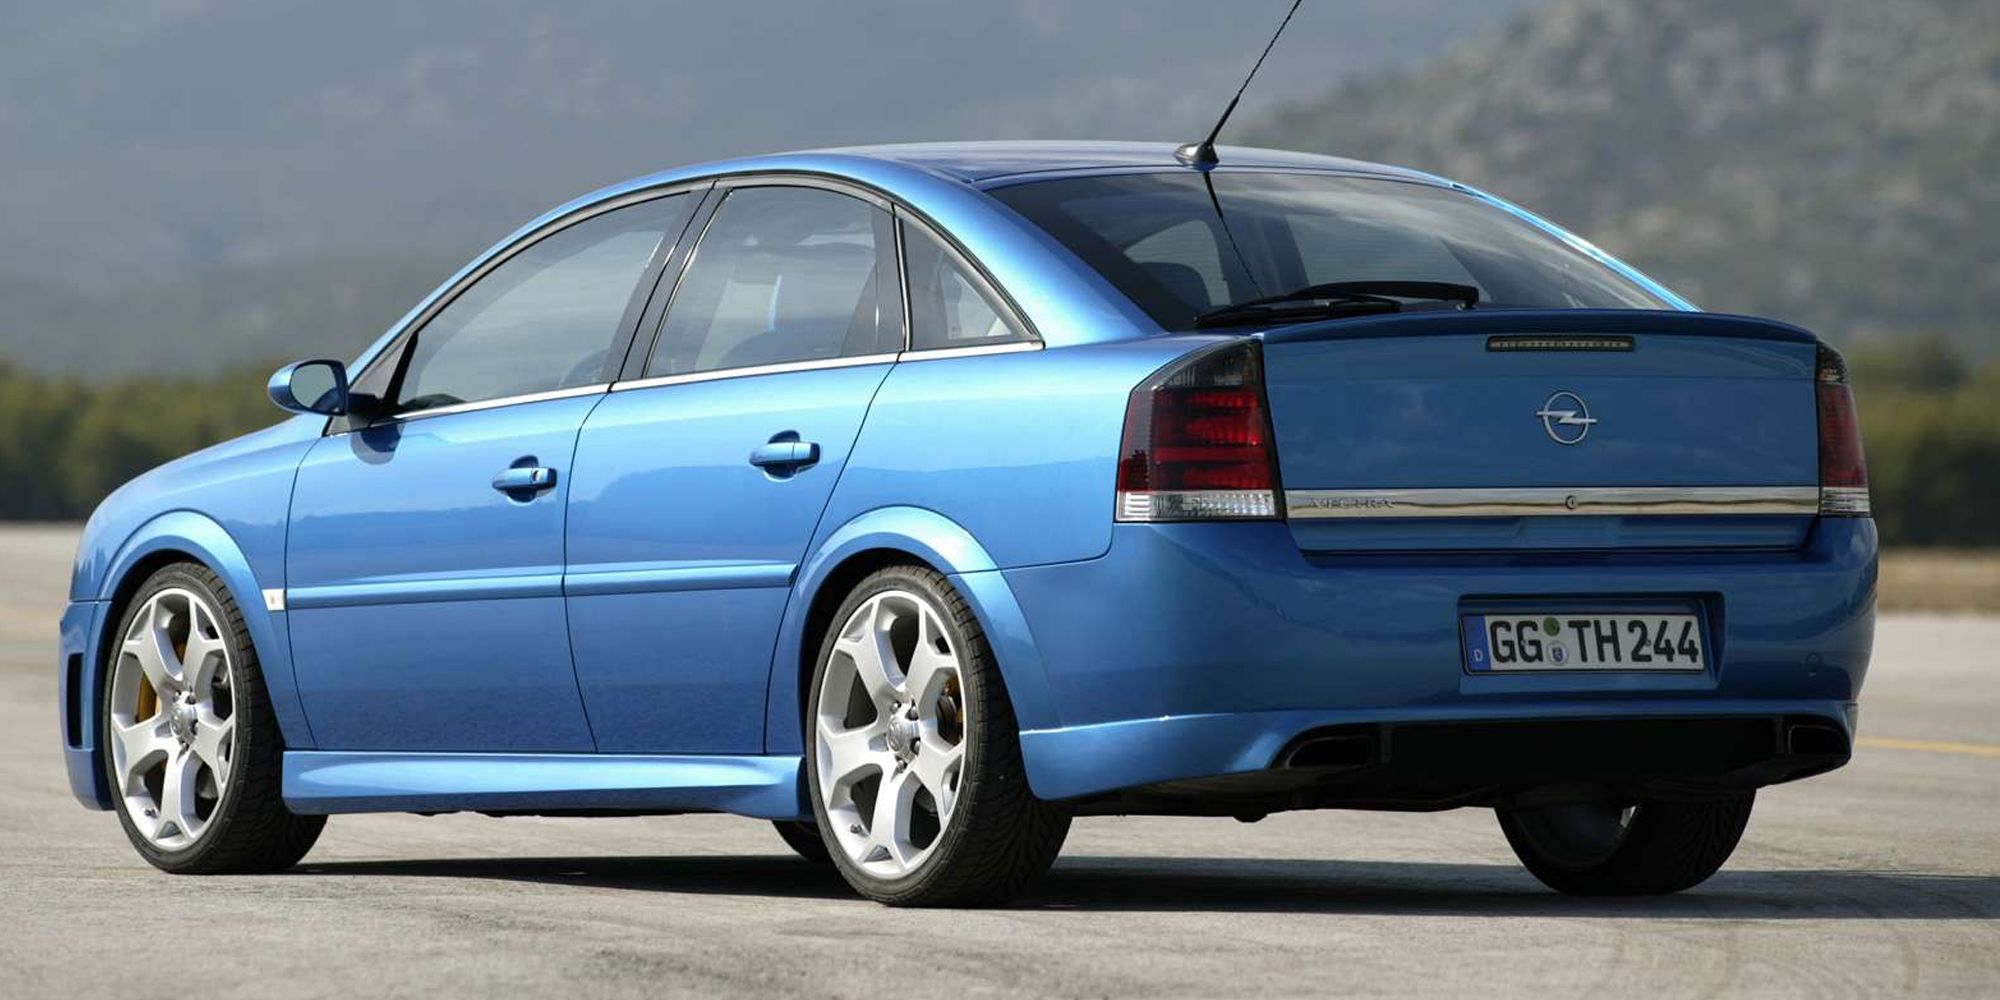 The rear of the Vectra OPC